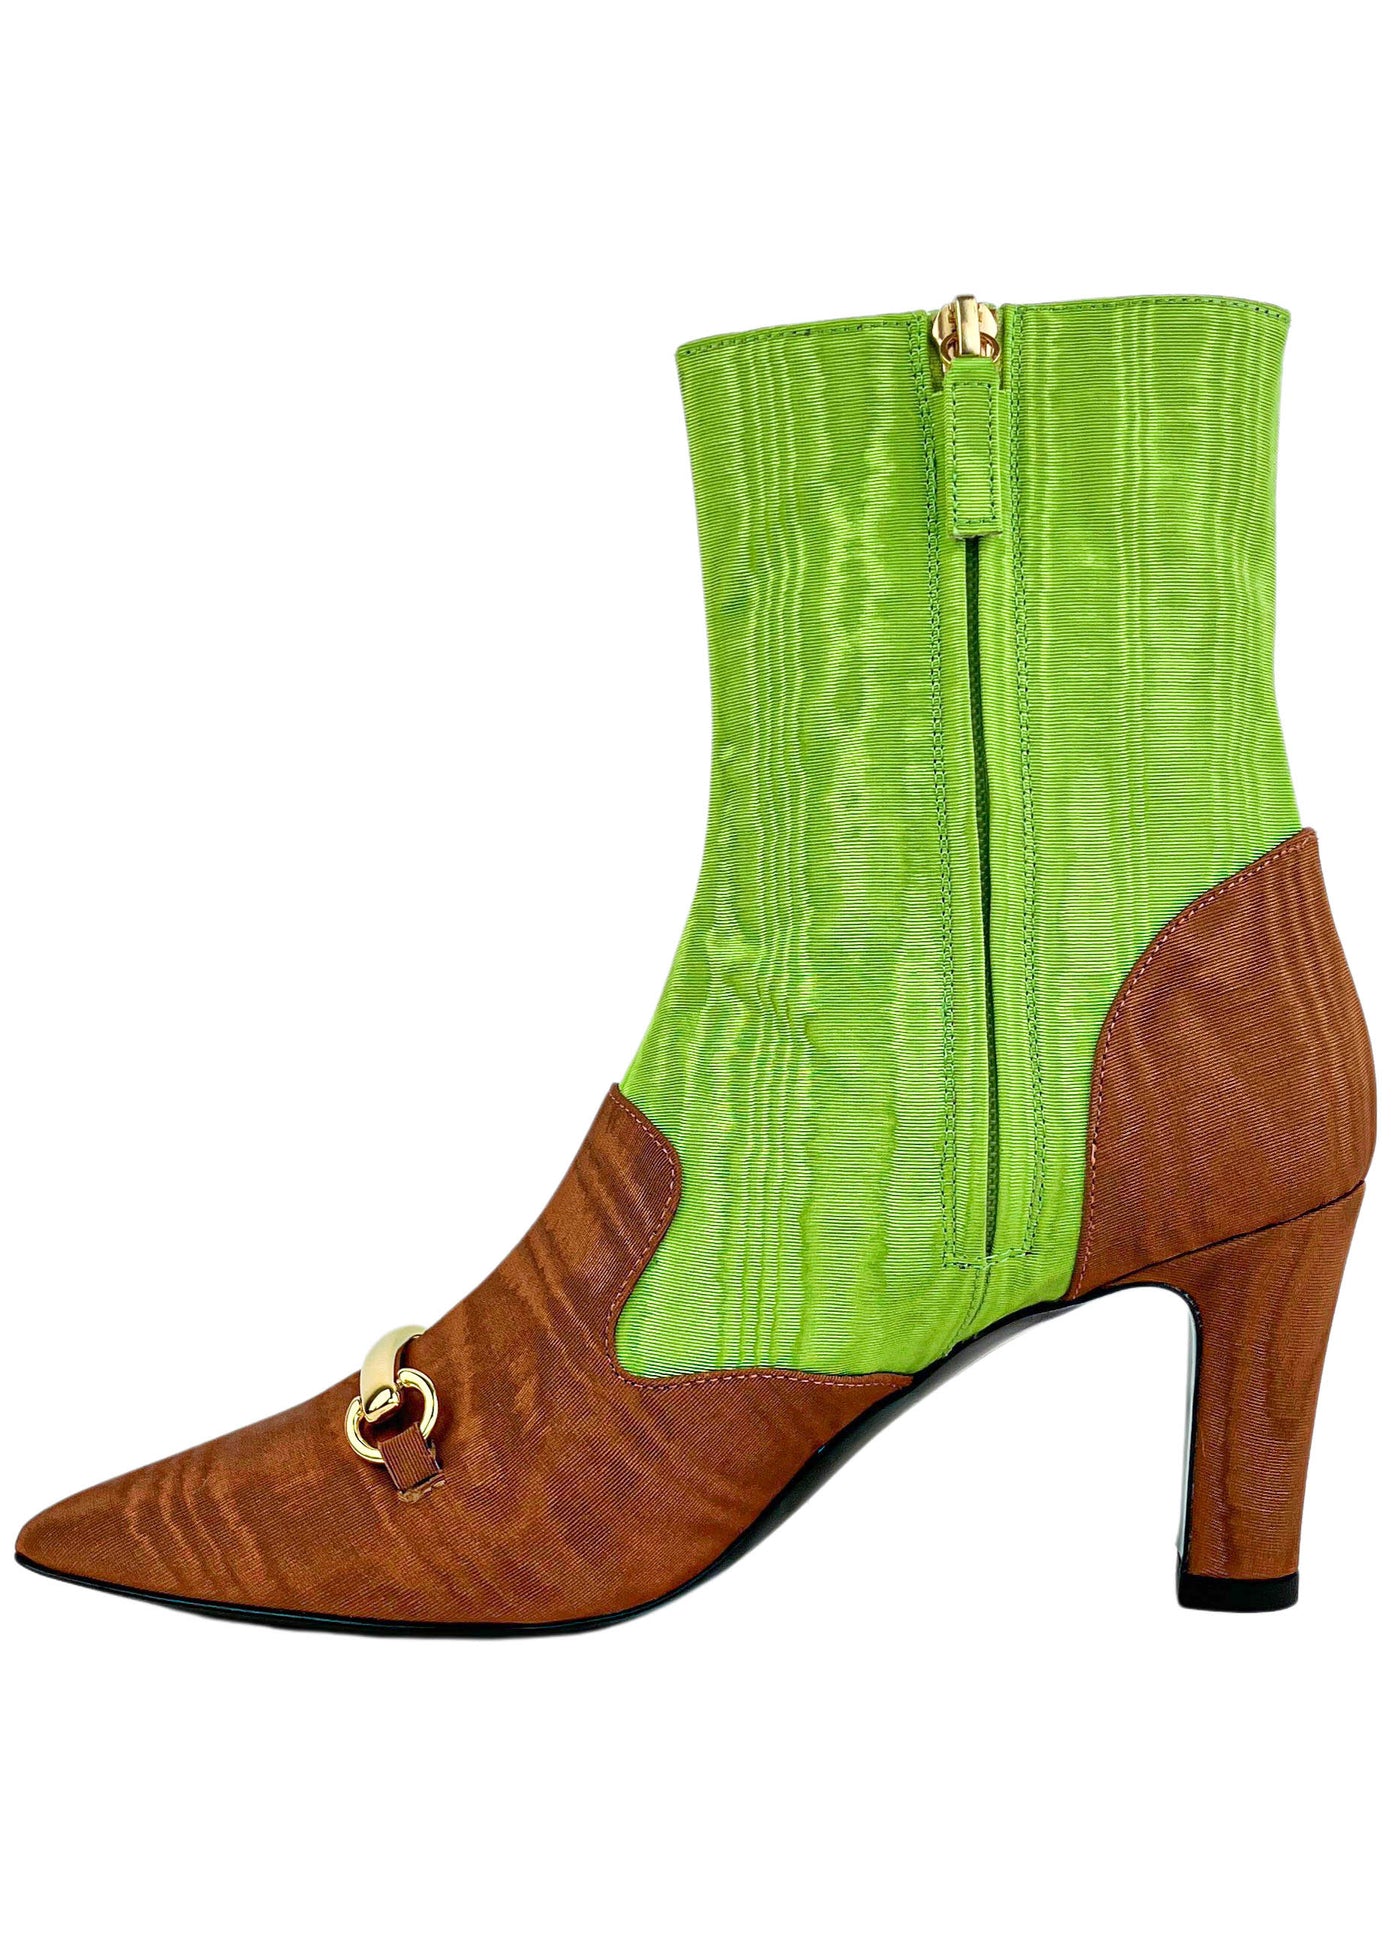 Suzanne Rae Blixen Lady Boot in Lime and Harvest Brown - Discounts on Suzanne Rae at UAL